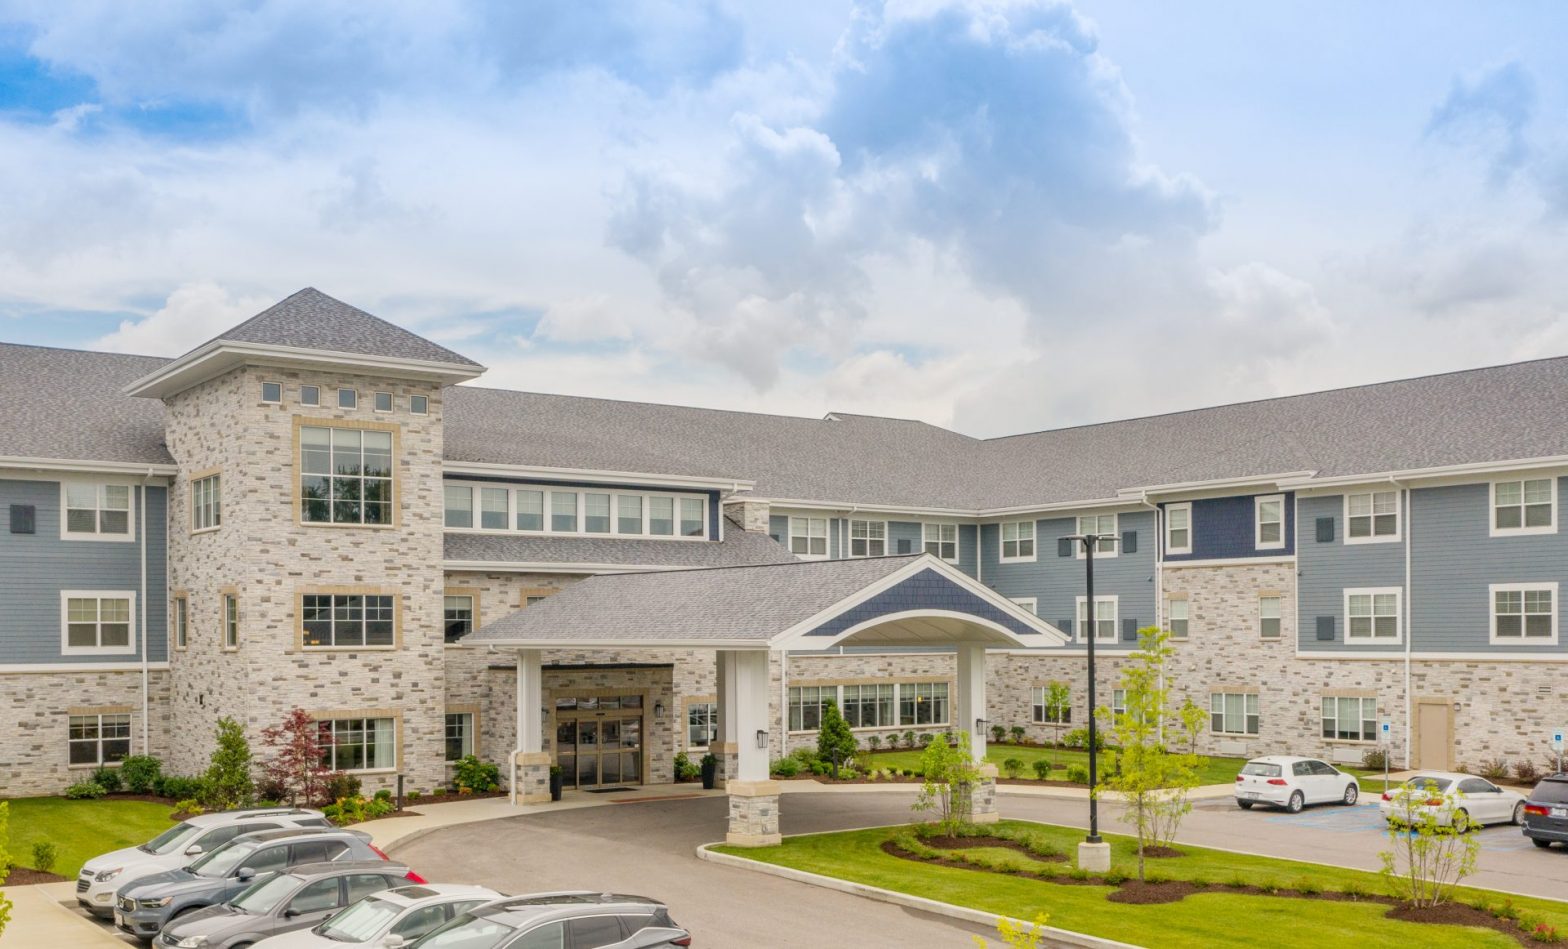 Modern senior living facility exterior with landscaped entrance and parked cars under a cloudy sky.